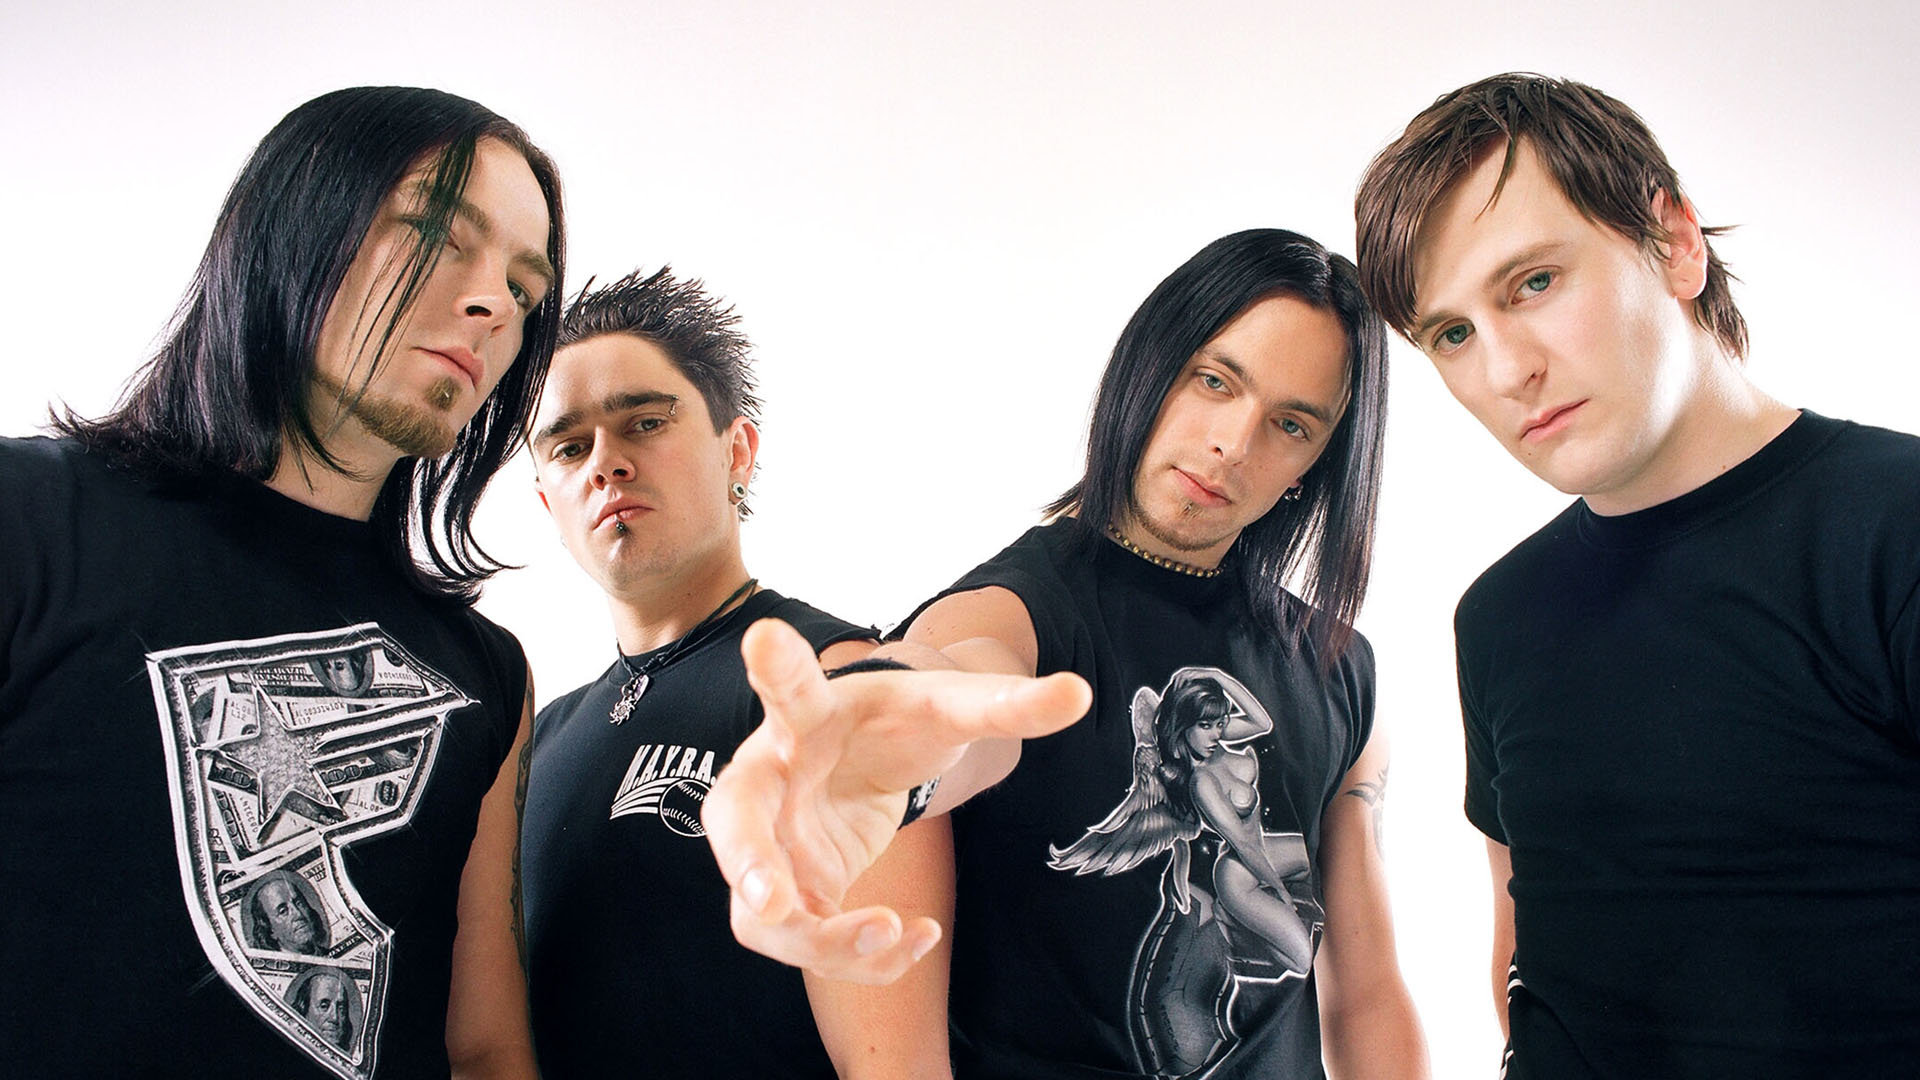 Awesome Bullet For My Valentine free wallpaper ID:319685 for hd 1920x1080 desktop